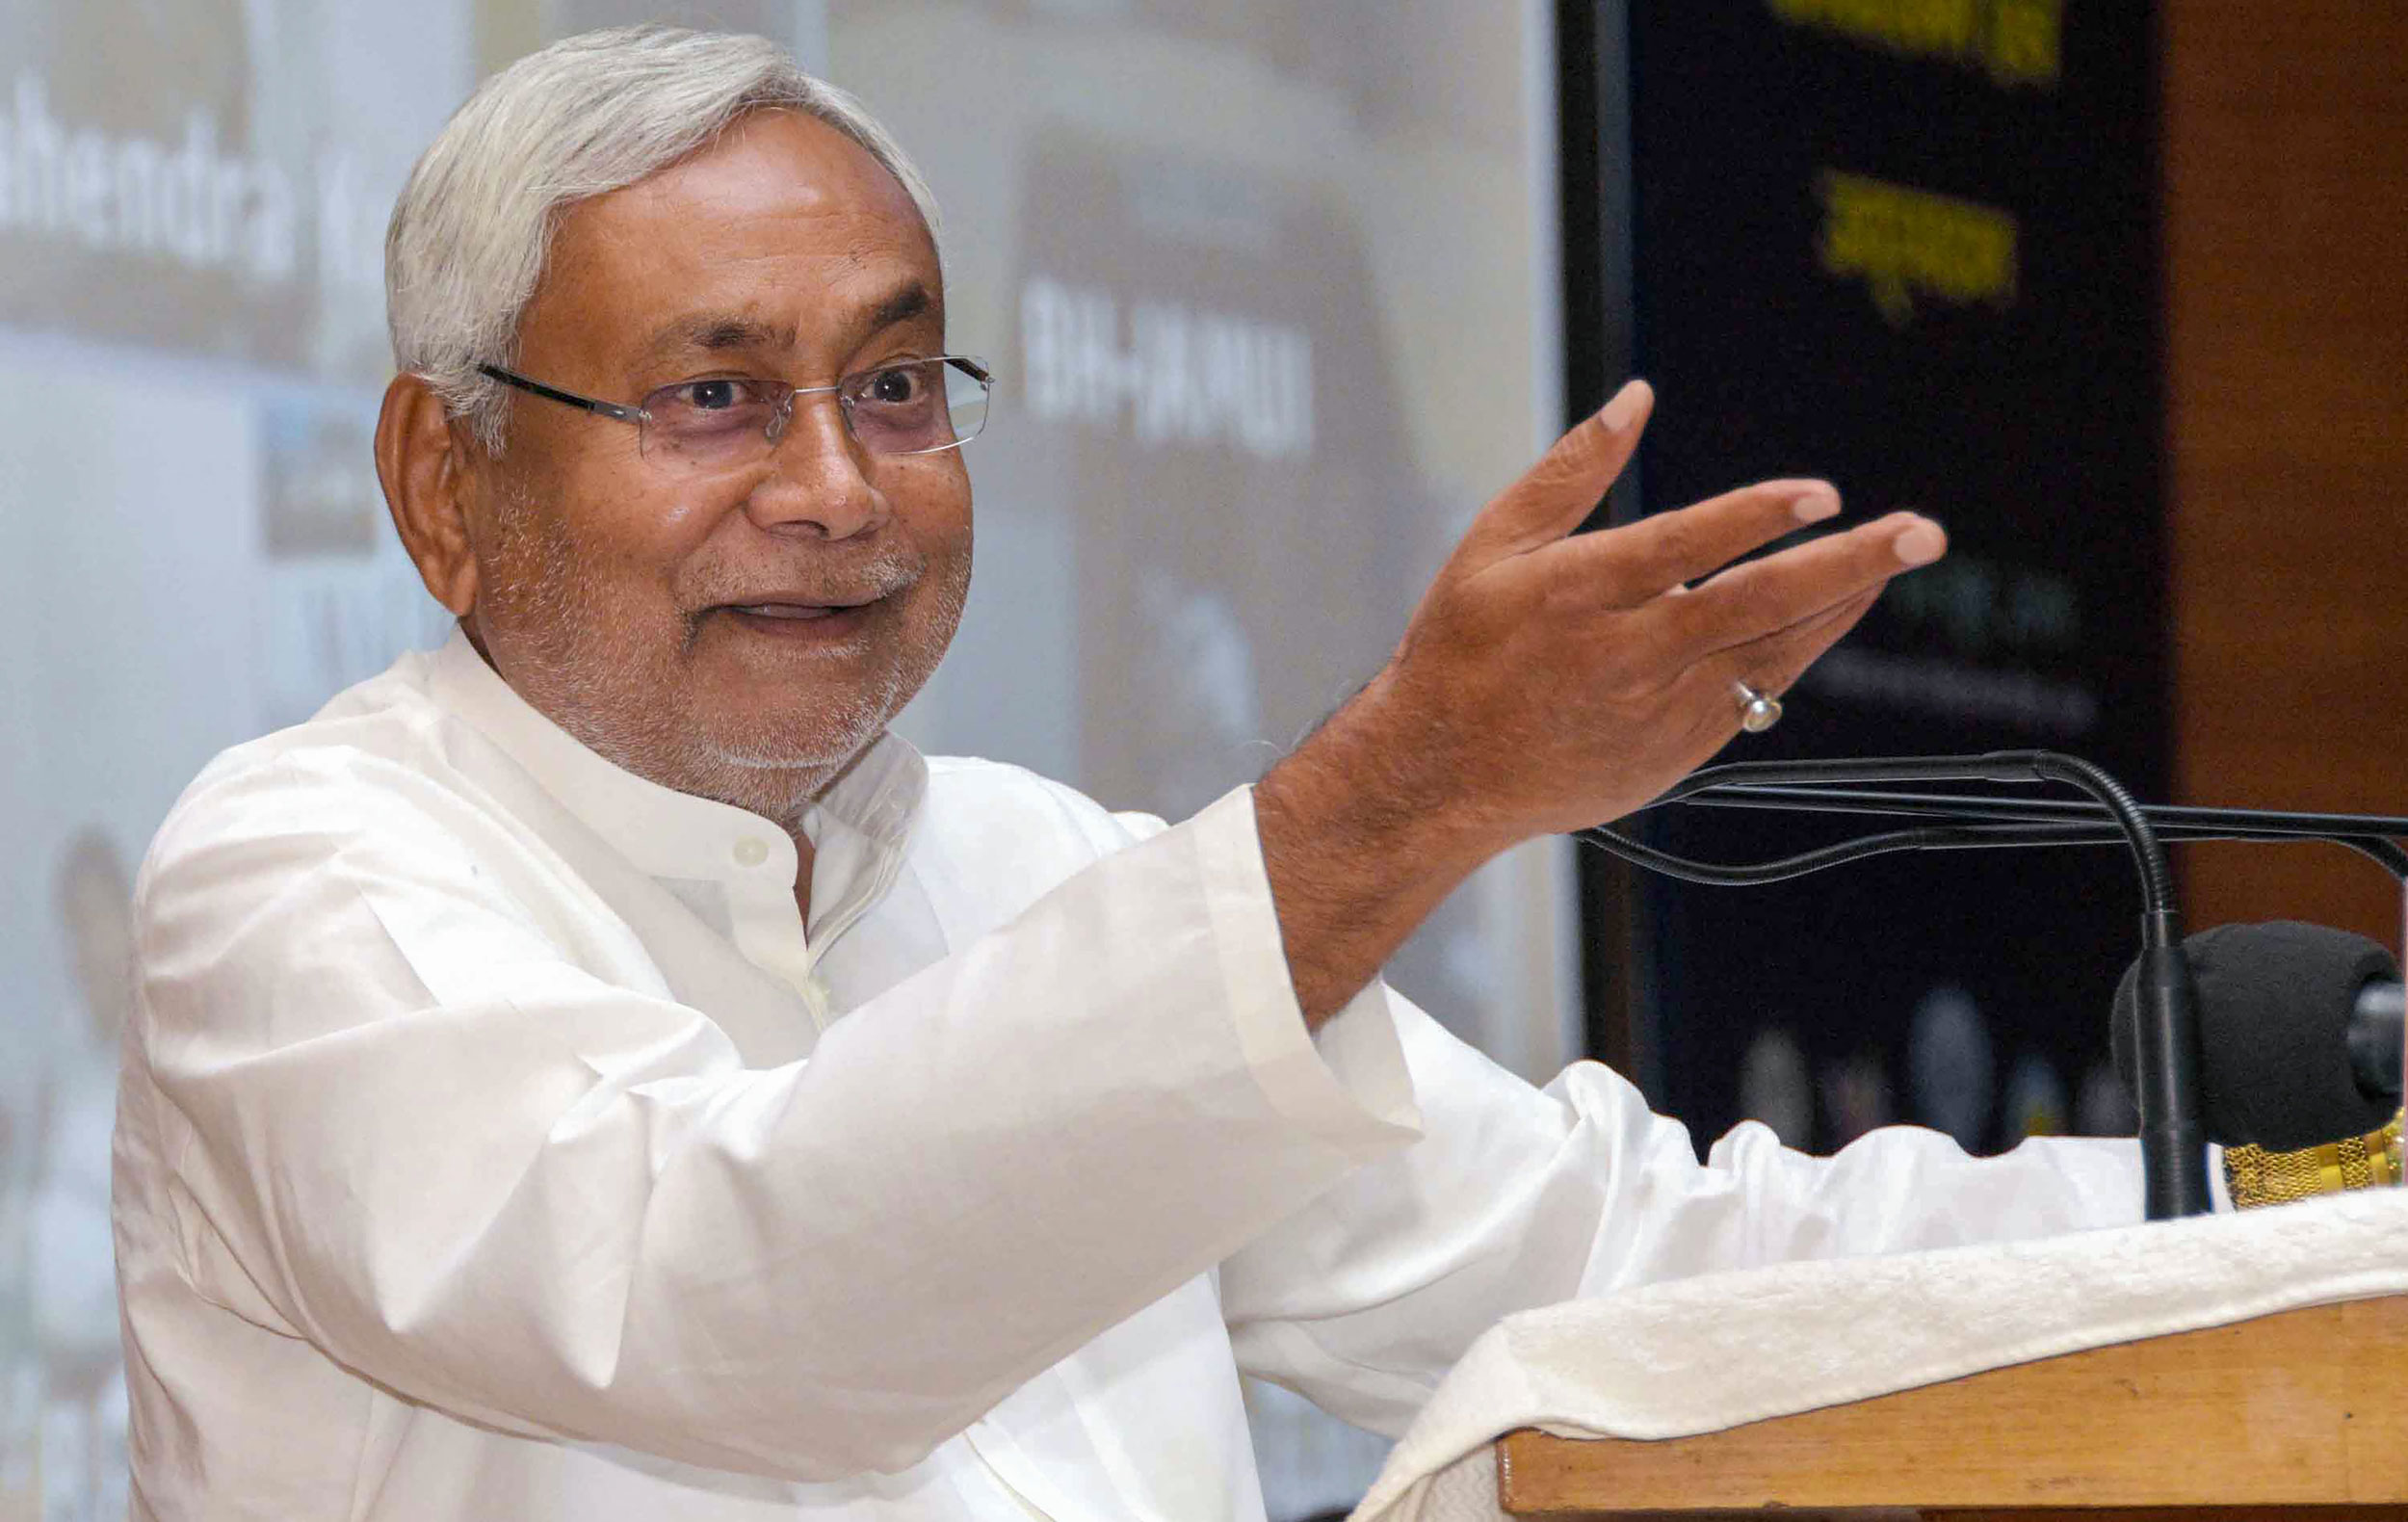 Nitish Kumar in Patna on June 4, 2019. “There has been no talk between us. Confusion has happened in the media. Suddenly this question (about Kishor working for Trinamul) has come,” the JDU president said.

